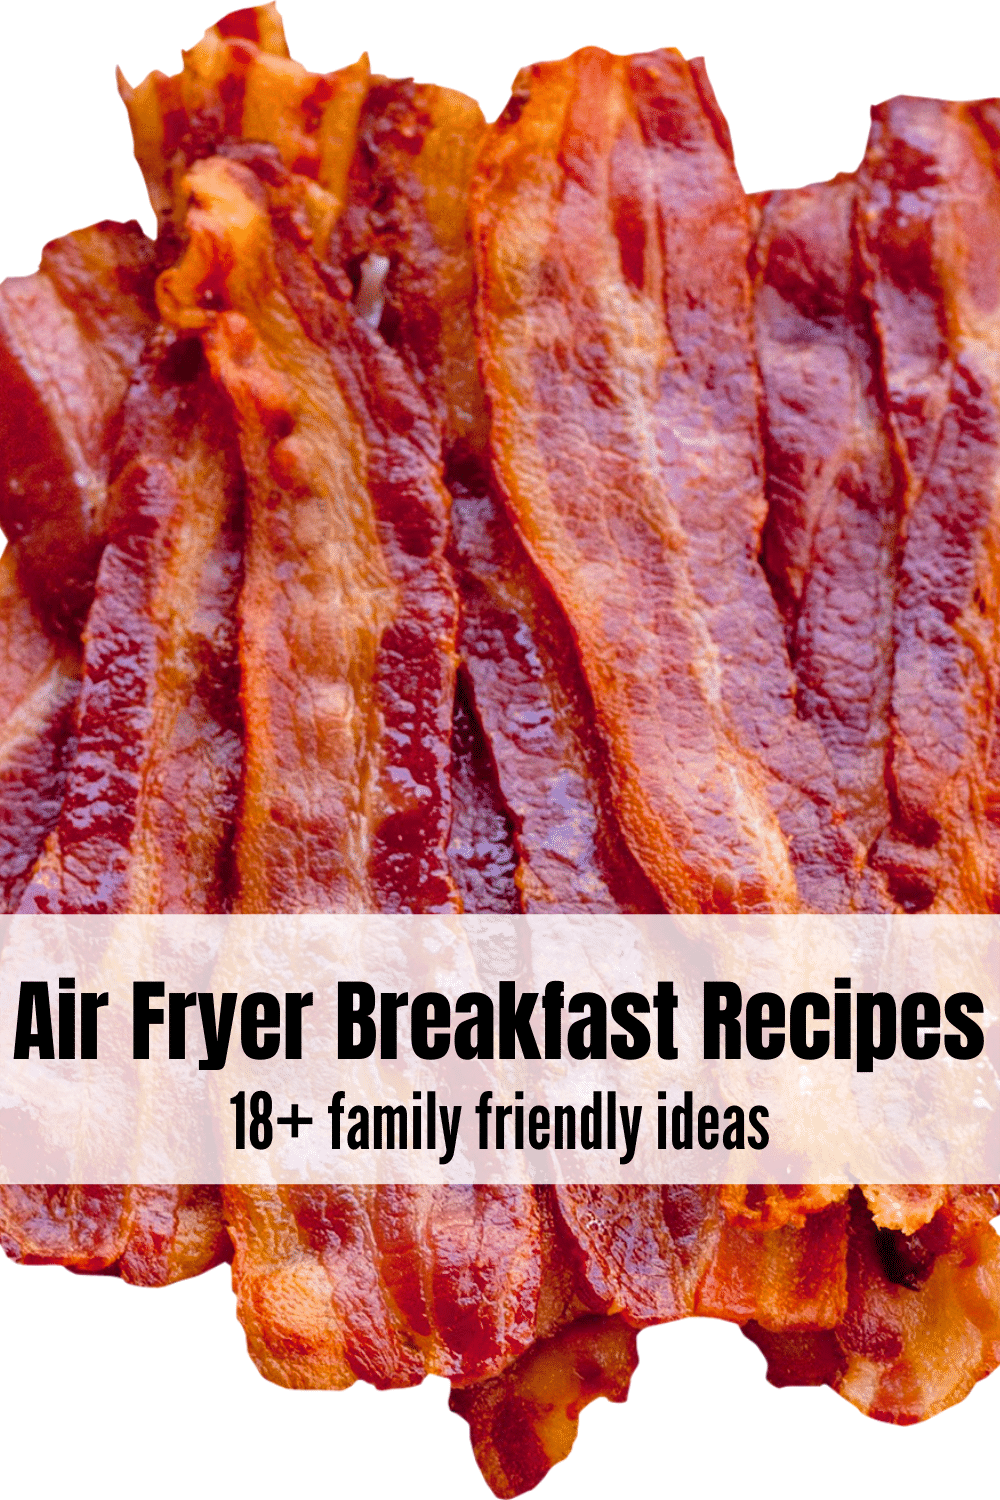 Air Fryer Breakfast Recipes are an easy to make get a delicious start to your day. Read on to learn how to cook over 18+ air fryer breakfast recipes. #airfryerbreakfast #breakfast via @vegetarianmamma